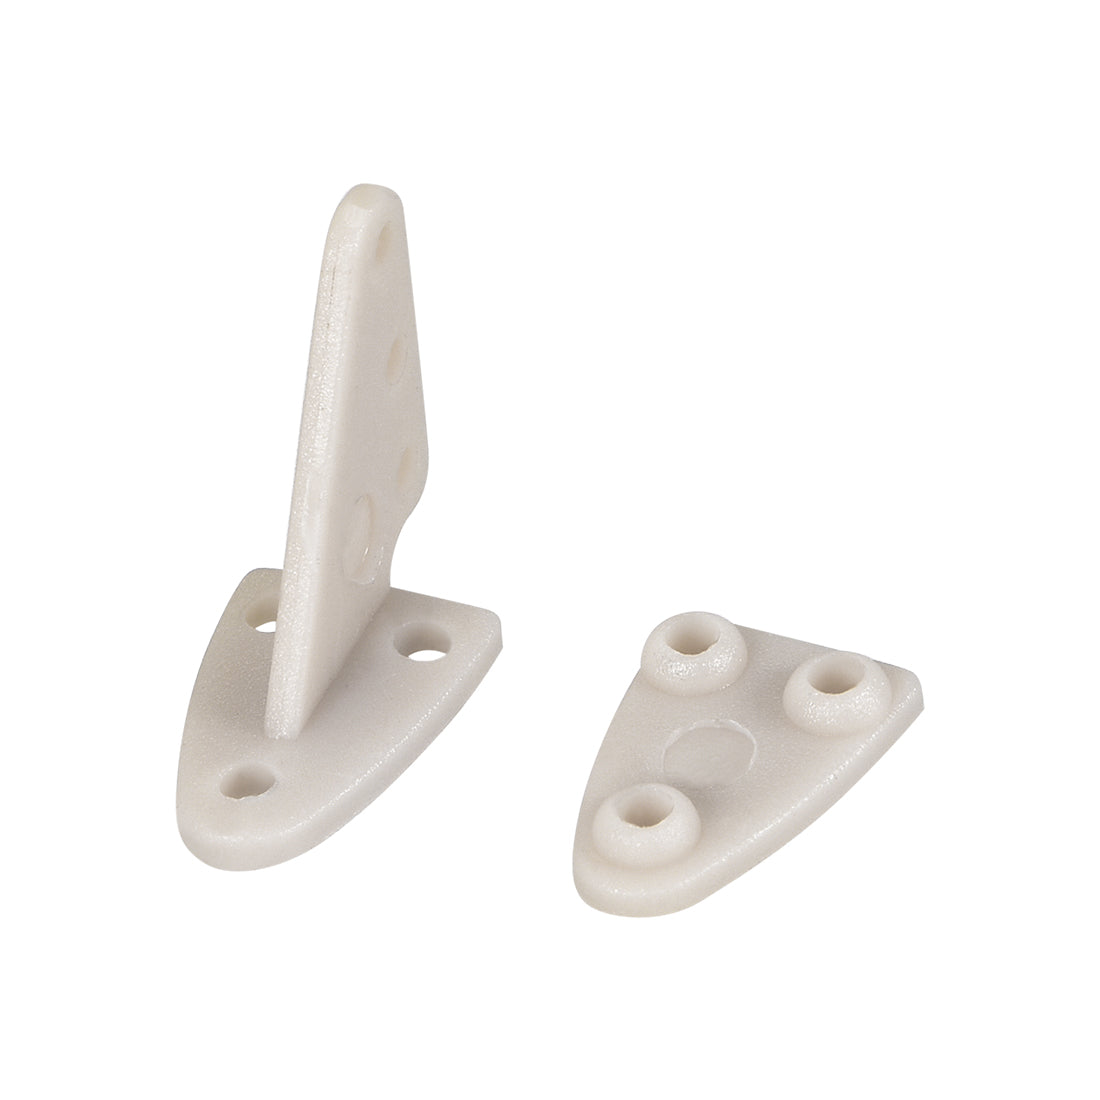 uxcell Uxcell Control Horn, 16x17mm Plastic Horns with 3 Holes 1.6mm for RC Airplane Parts Grey 20 Sets